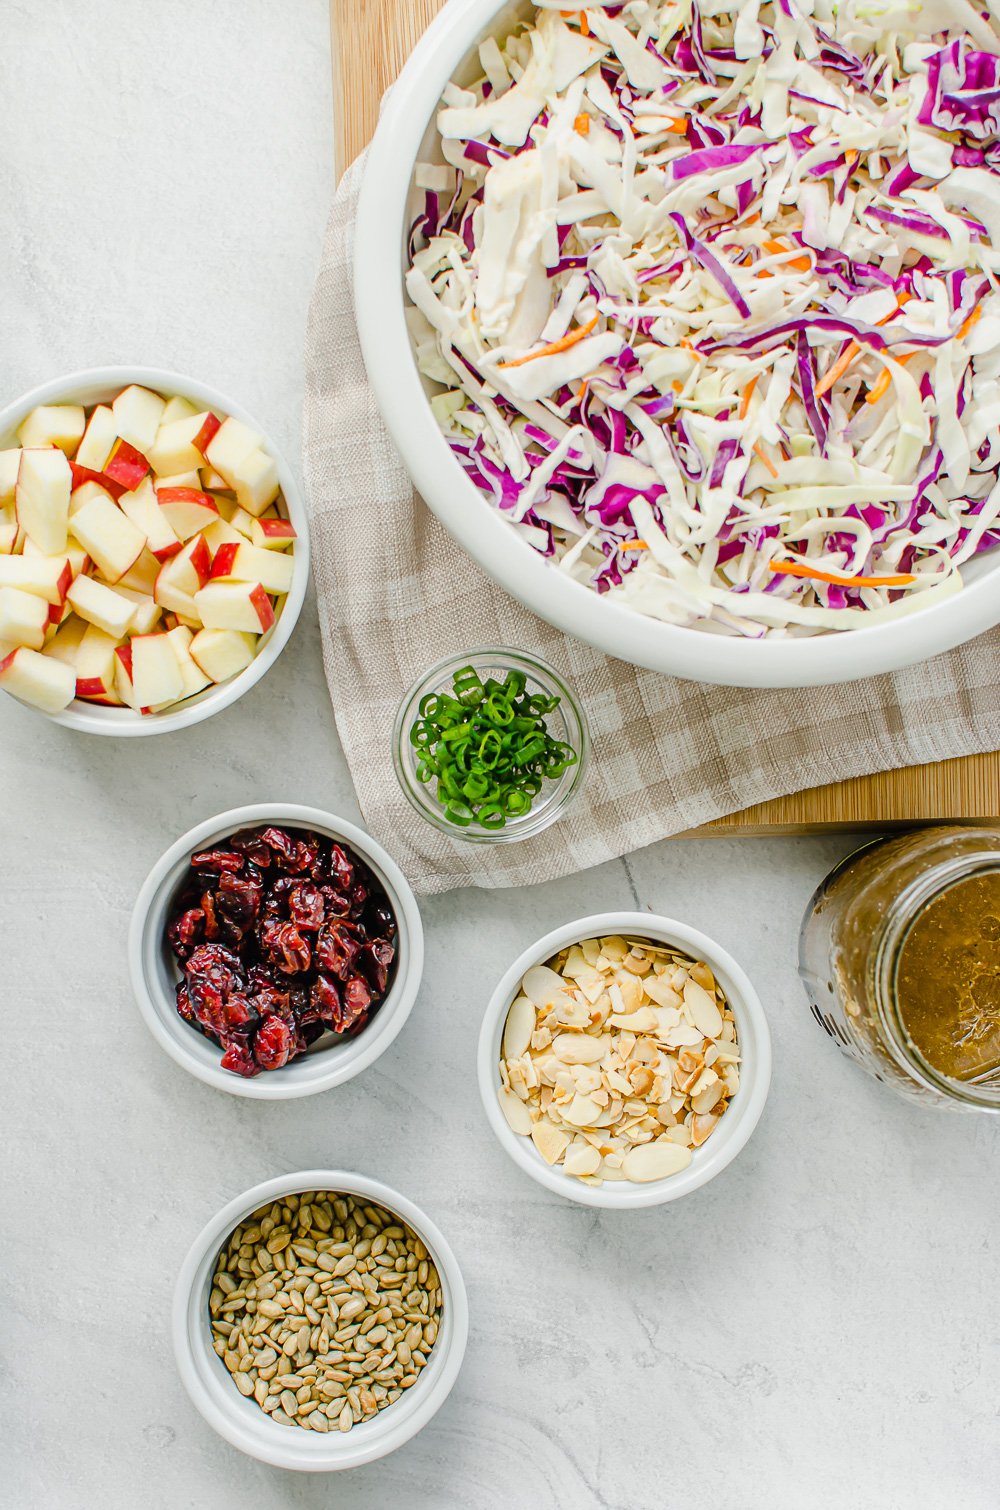 Ingredients for Asian Slaw measured out in bowls.